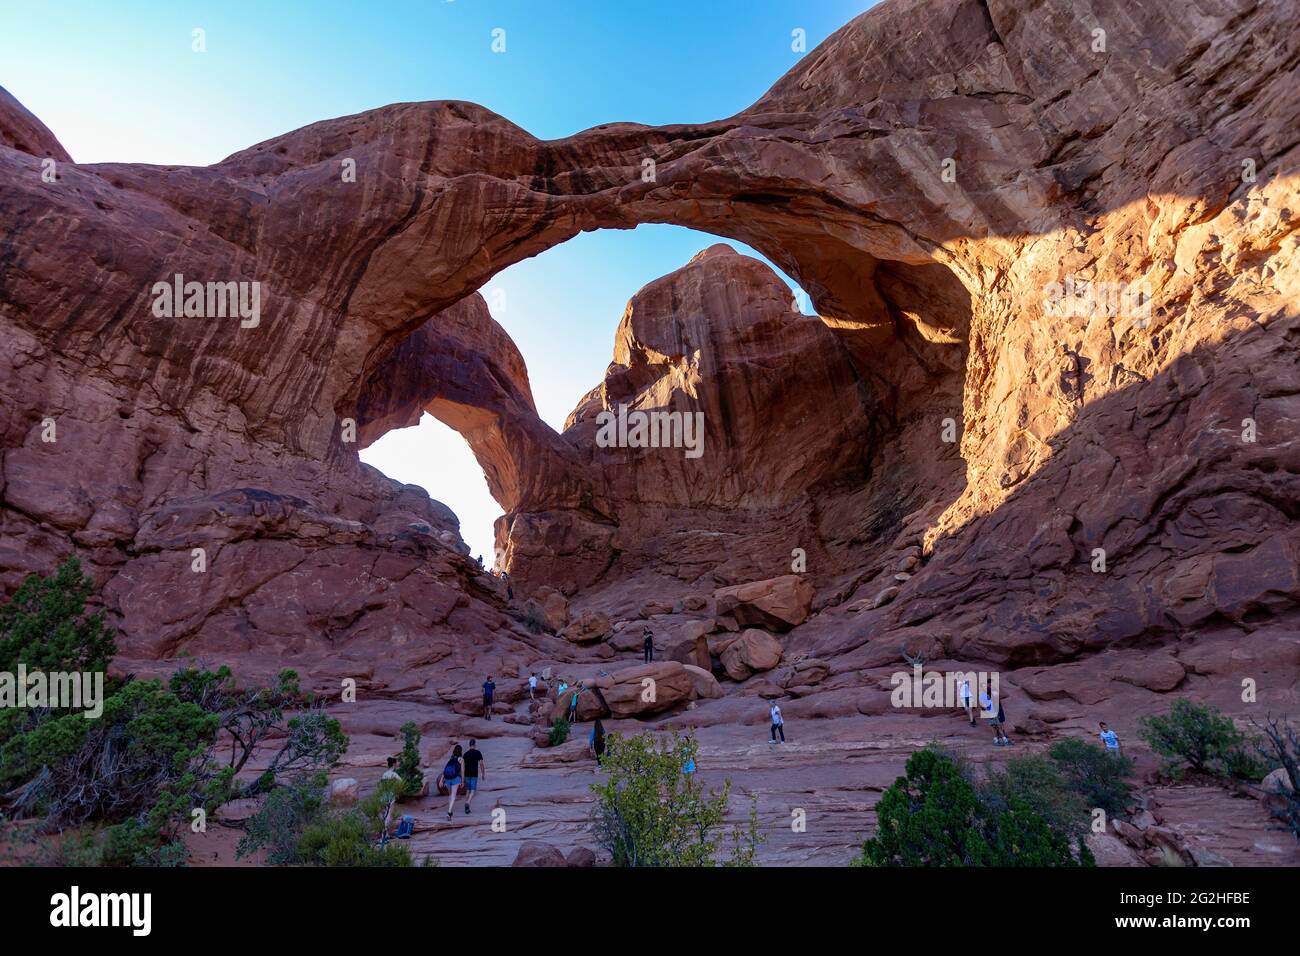 The famous Double Arch - a sandstone formation & popular photo spot with two big arches springing from the same side foundation - noted for front & back spans in Arches National Park, near Moab in Utah, USA Stock Photo